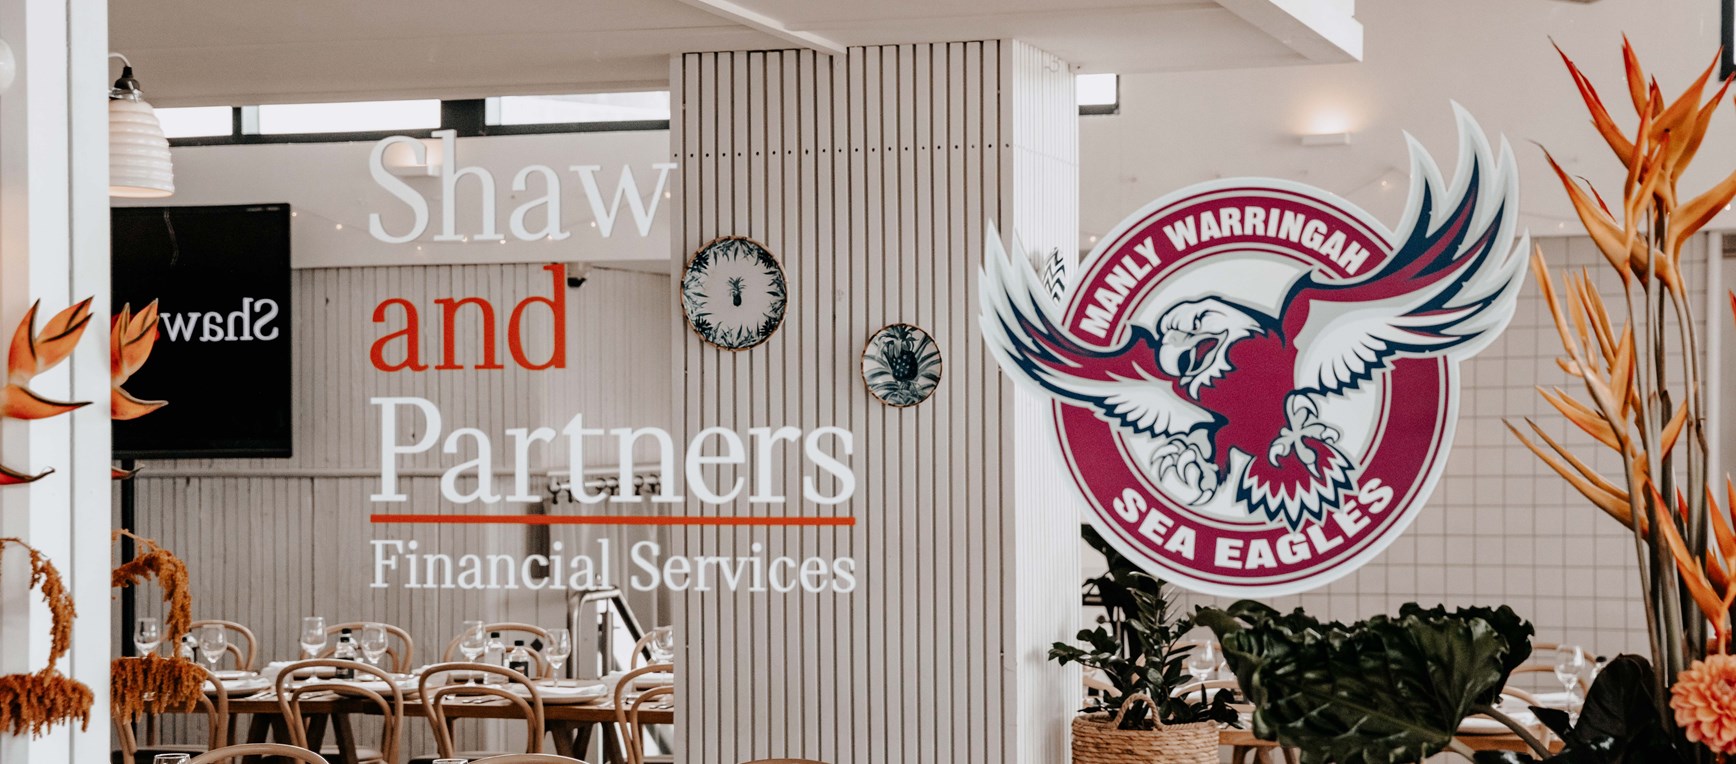 Shaw and Partners hosts Sea Eagles dinner